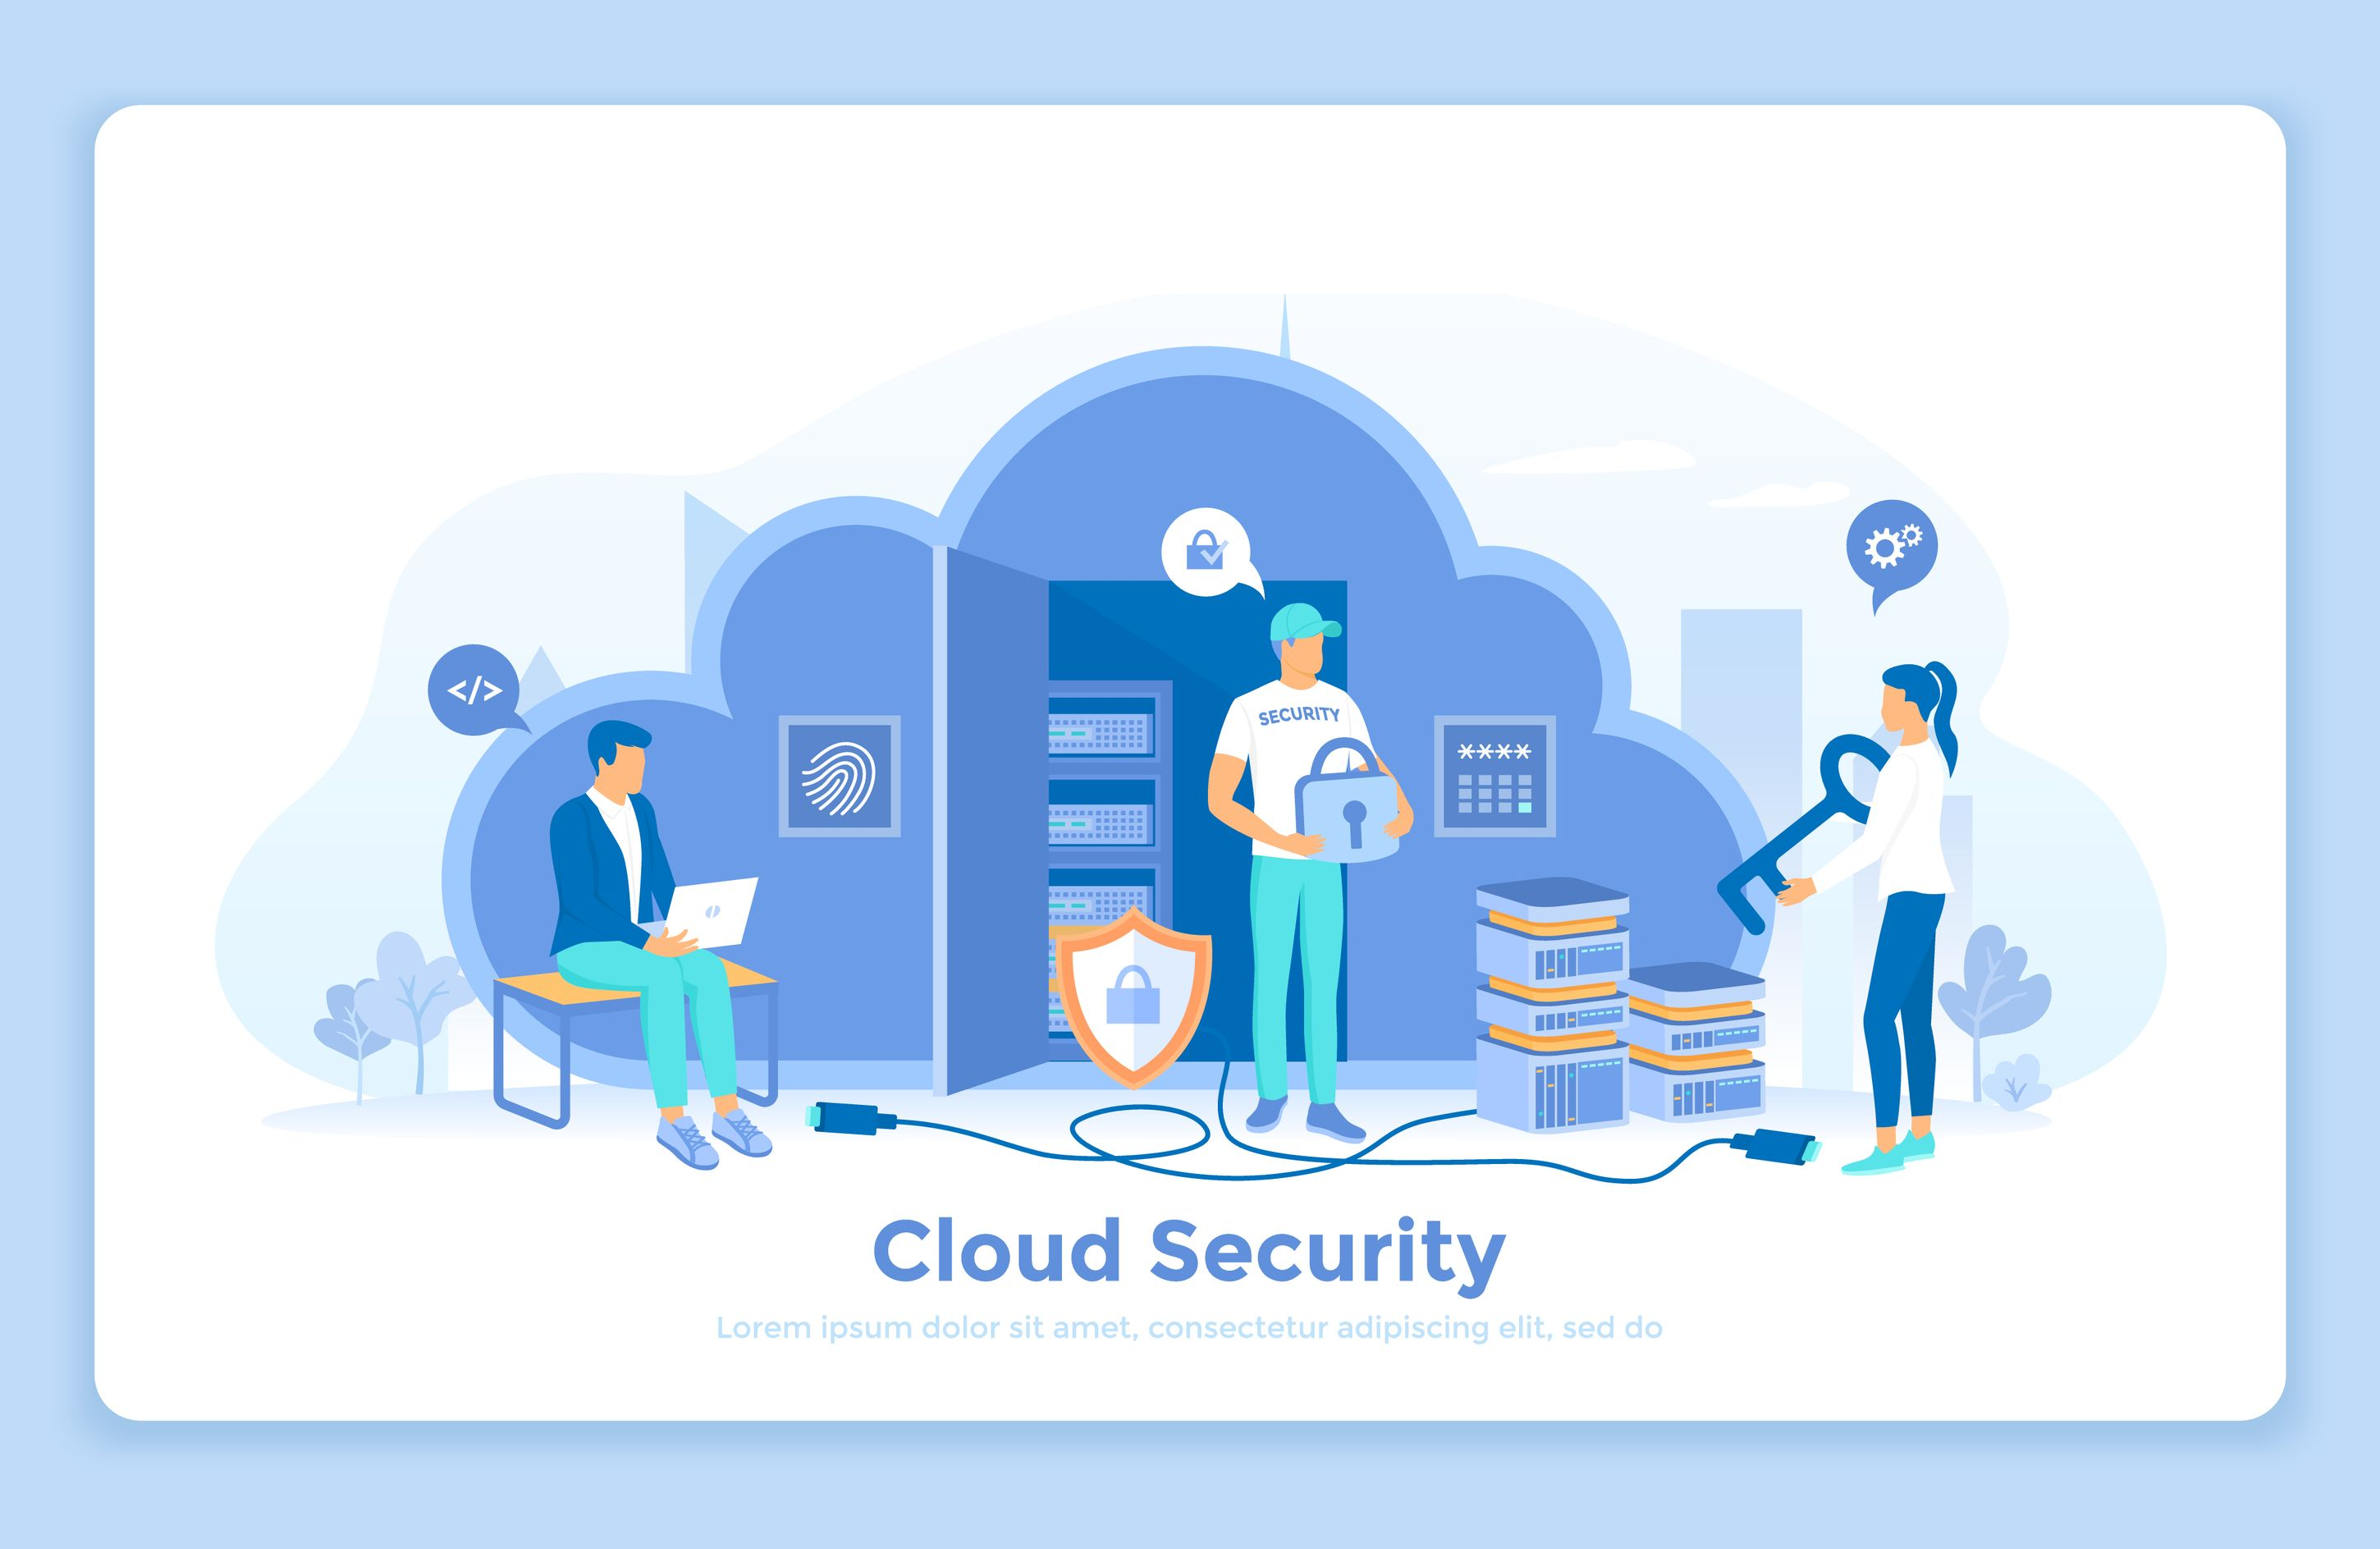 Ensuring robust Cloud Security architecture